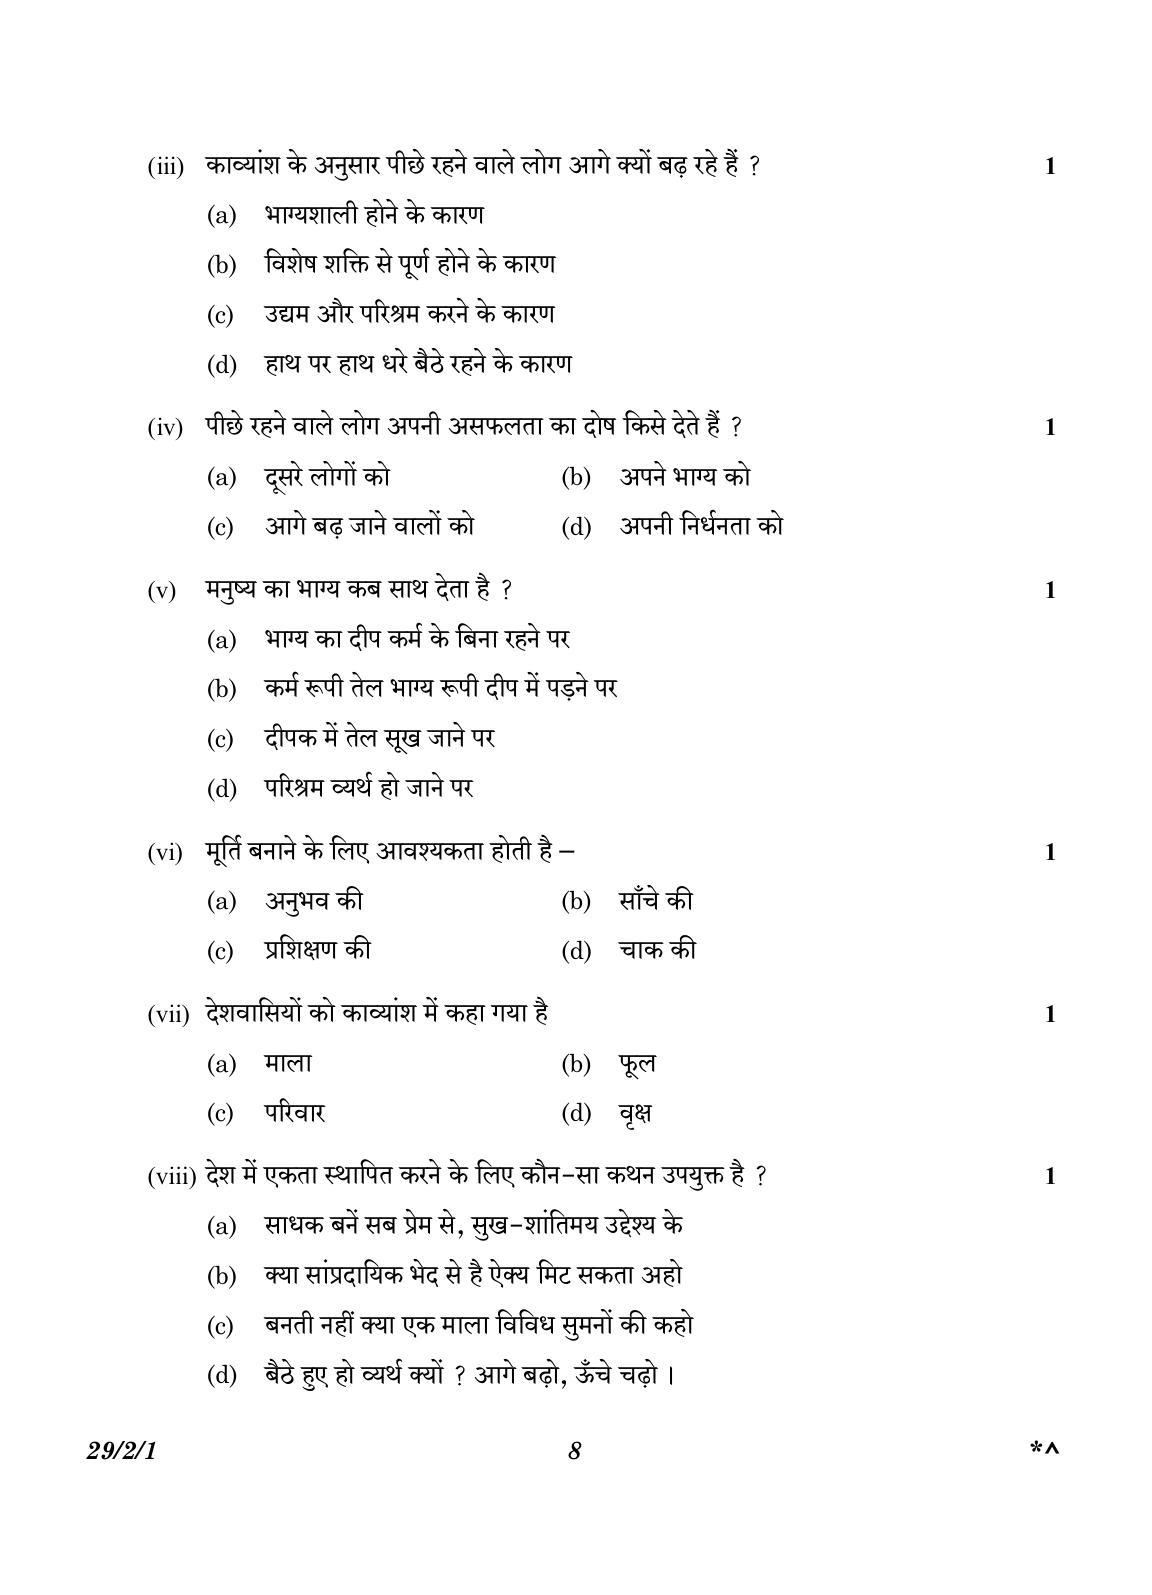 CBSE Class 12 29-2-1 Hindi Elective 2023 Question Paper - Page 8